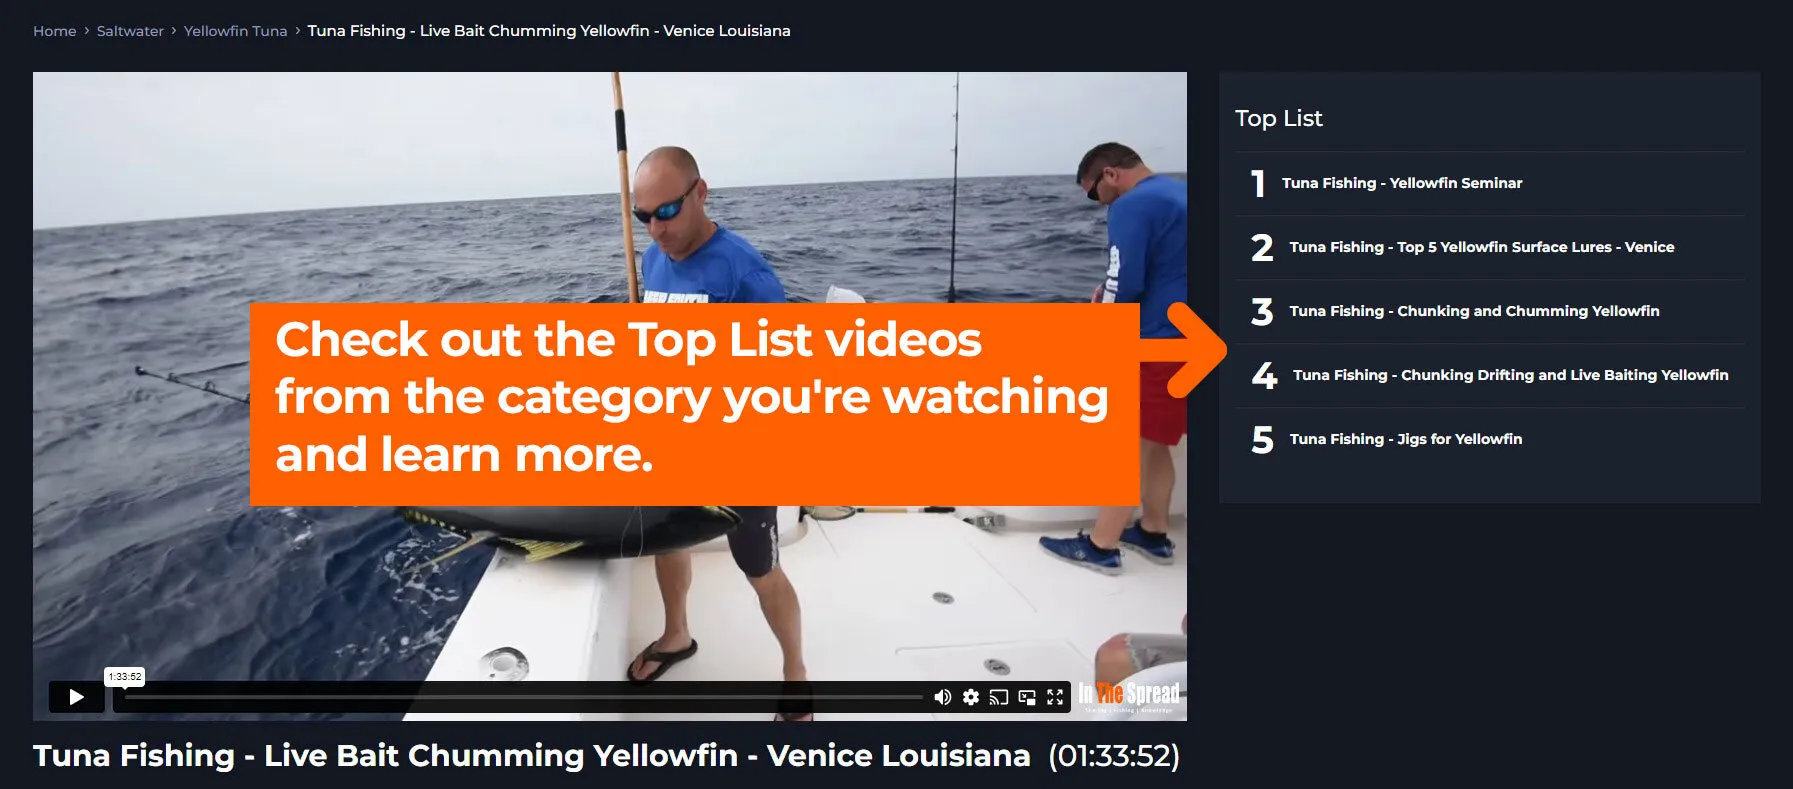 Top List Videos Section is a must-see